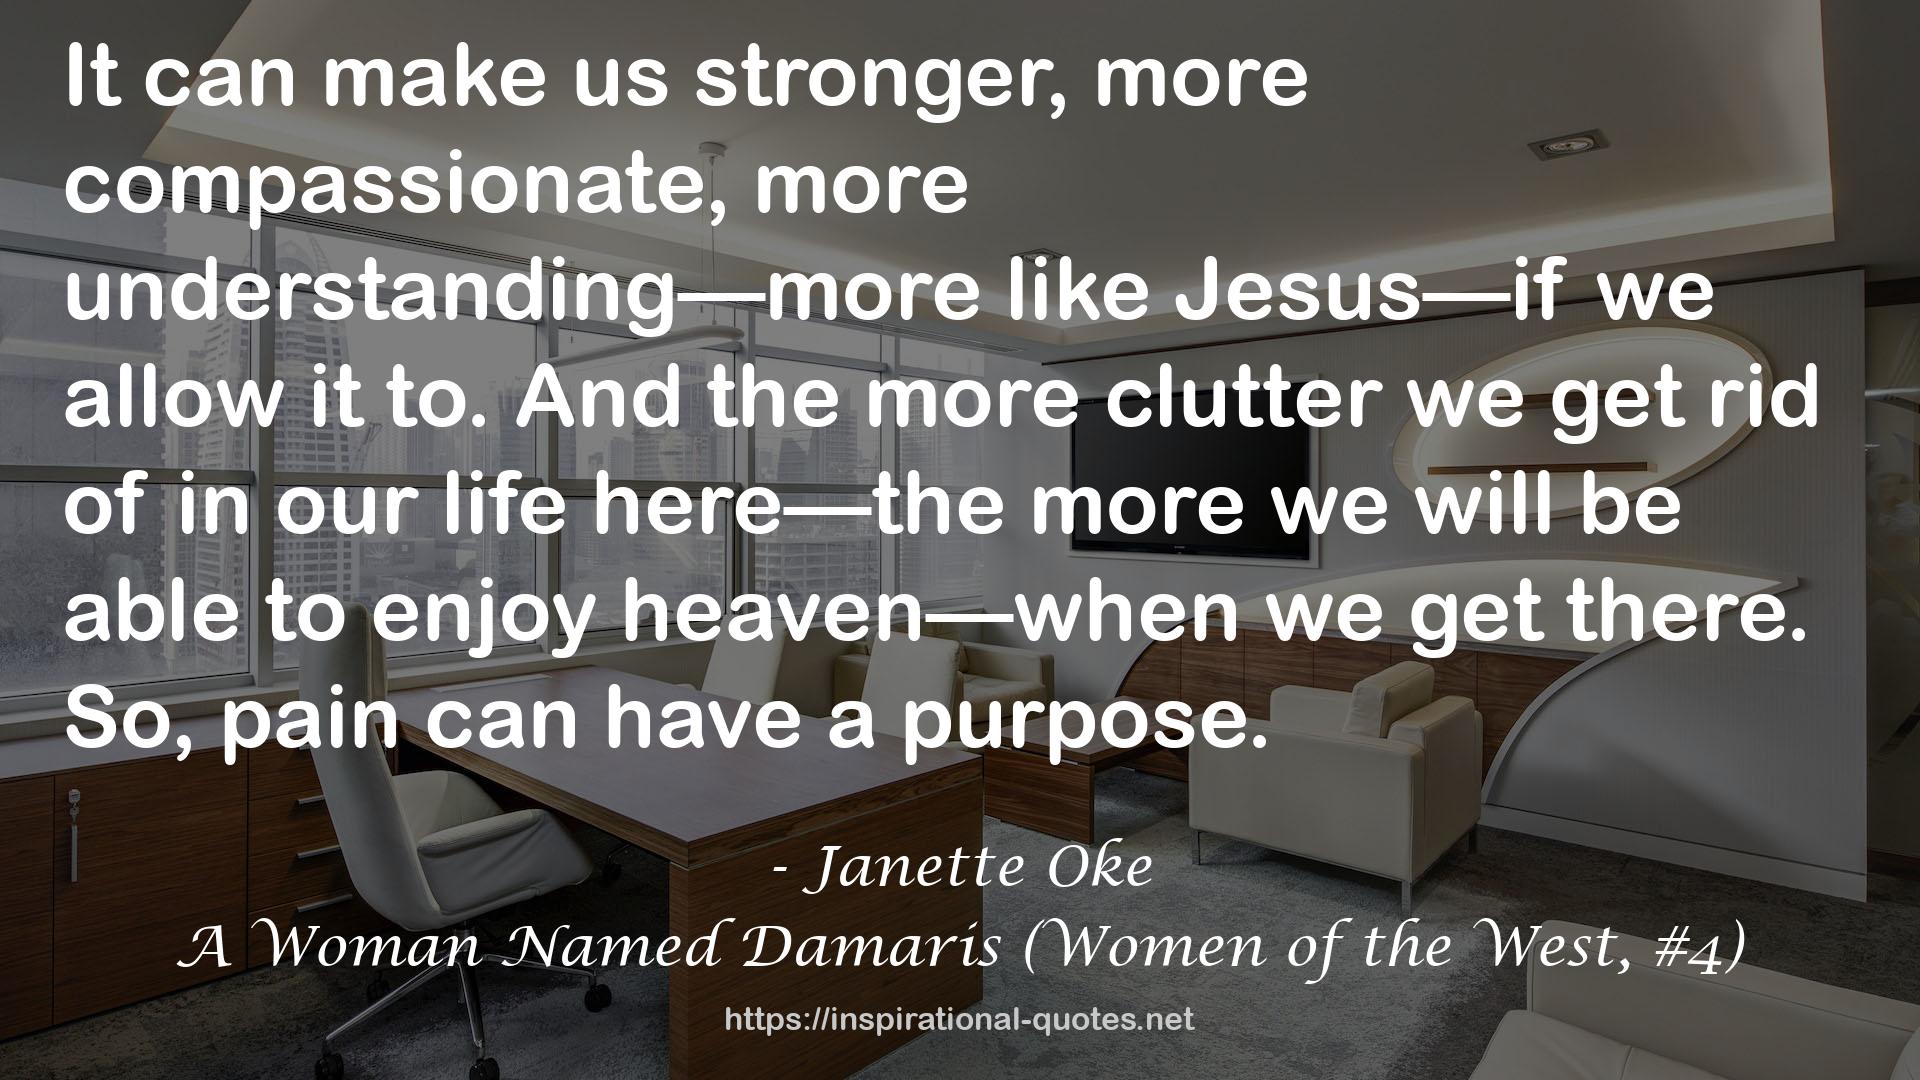 A Woman Named Damaris (Women of the West, #4) QUOTES